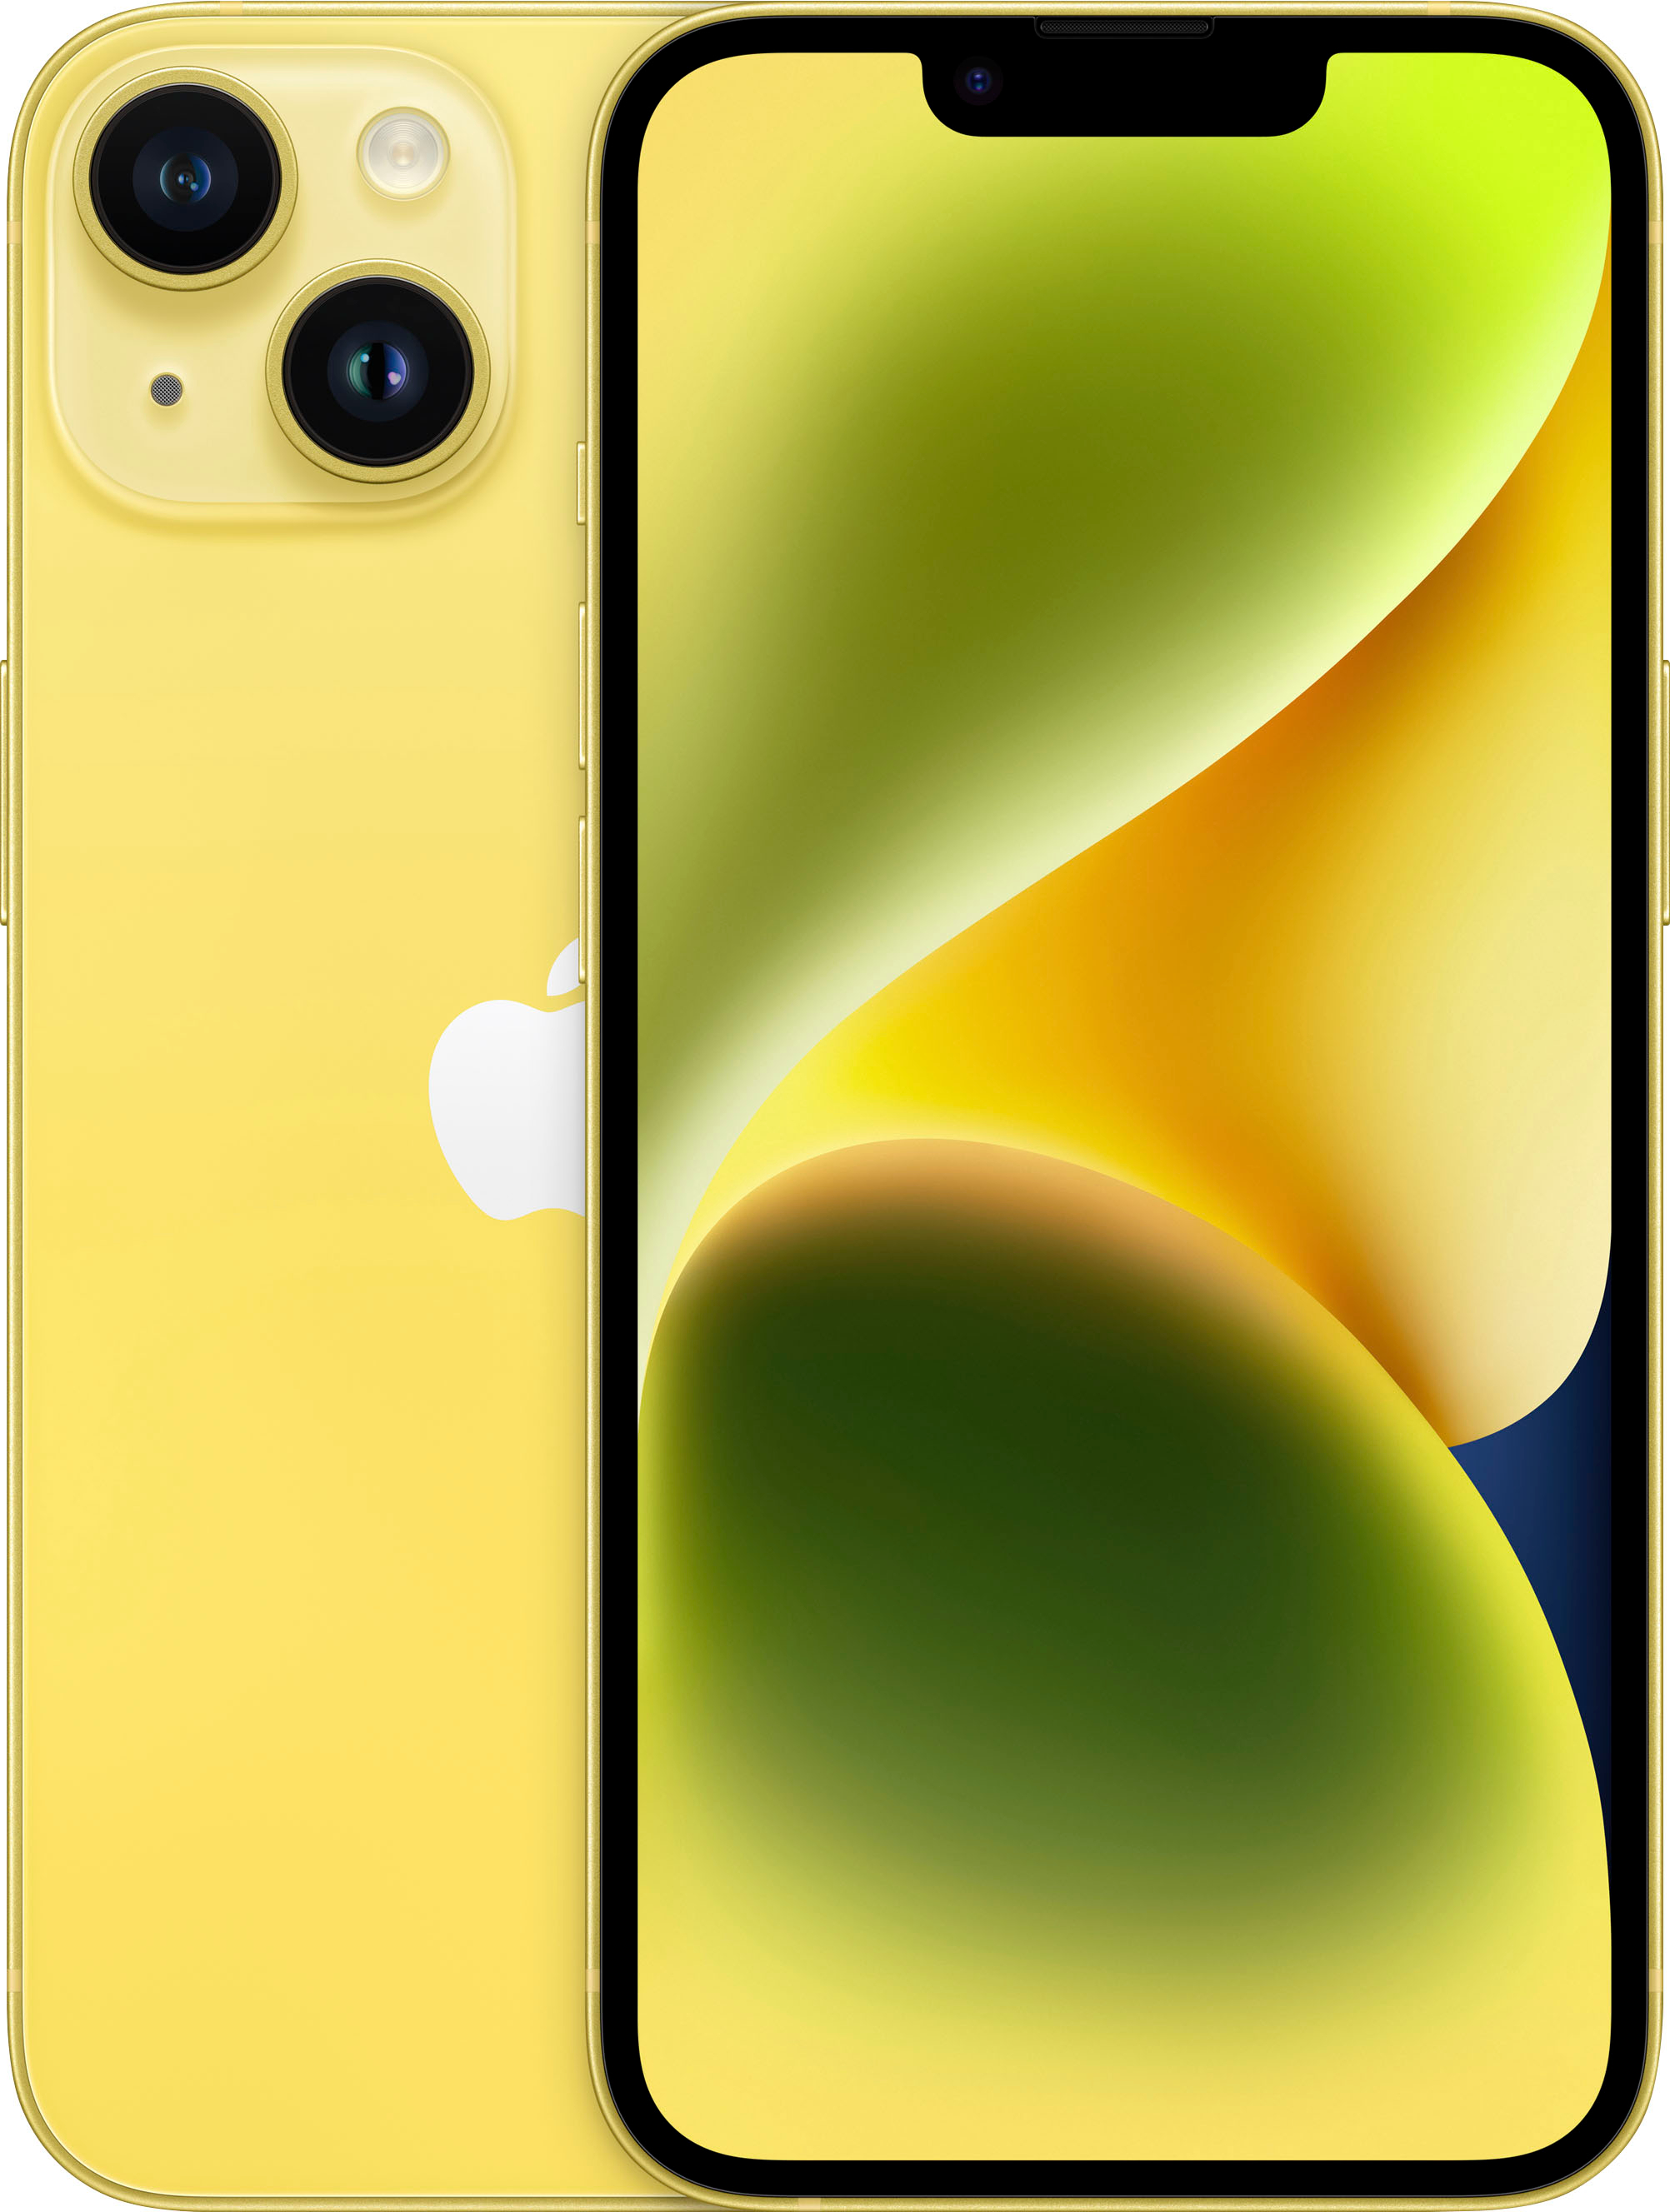 Is the iPhone 14 yellow?